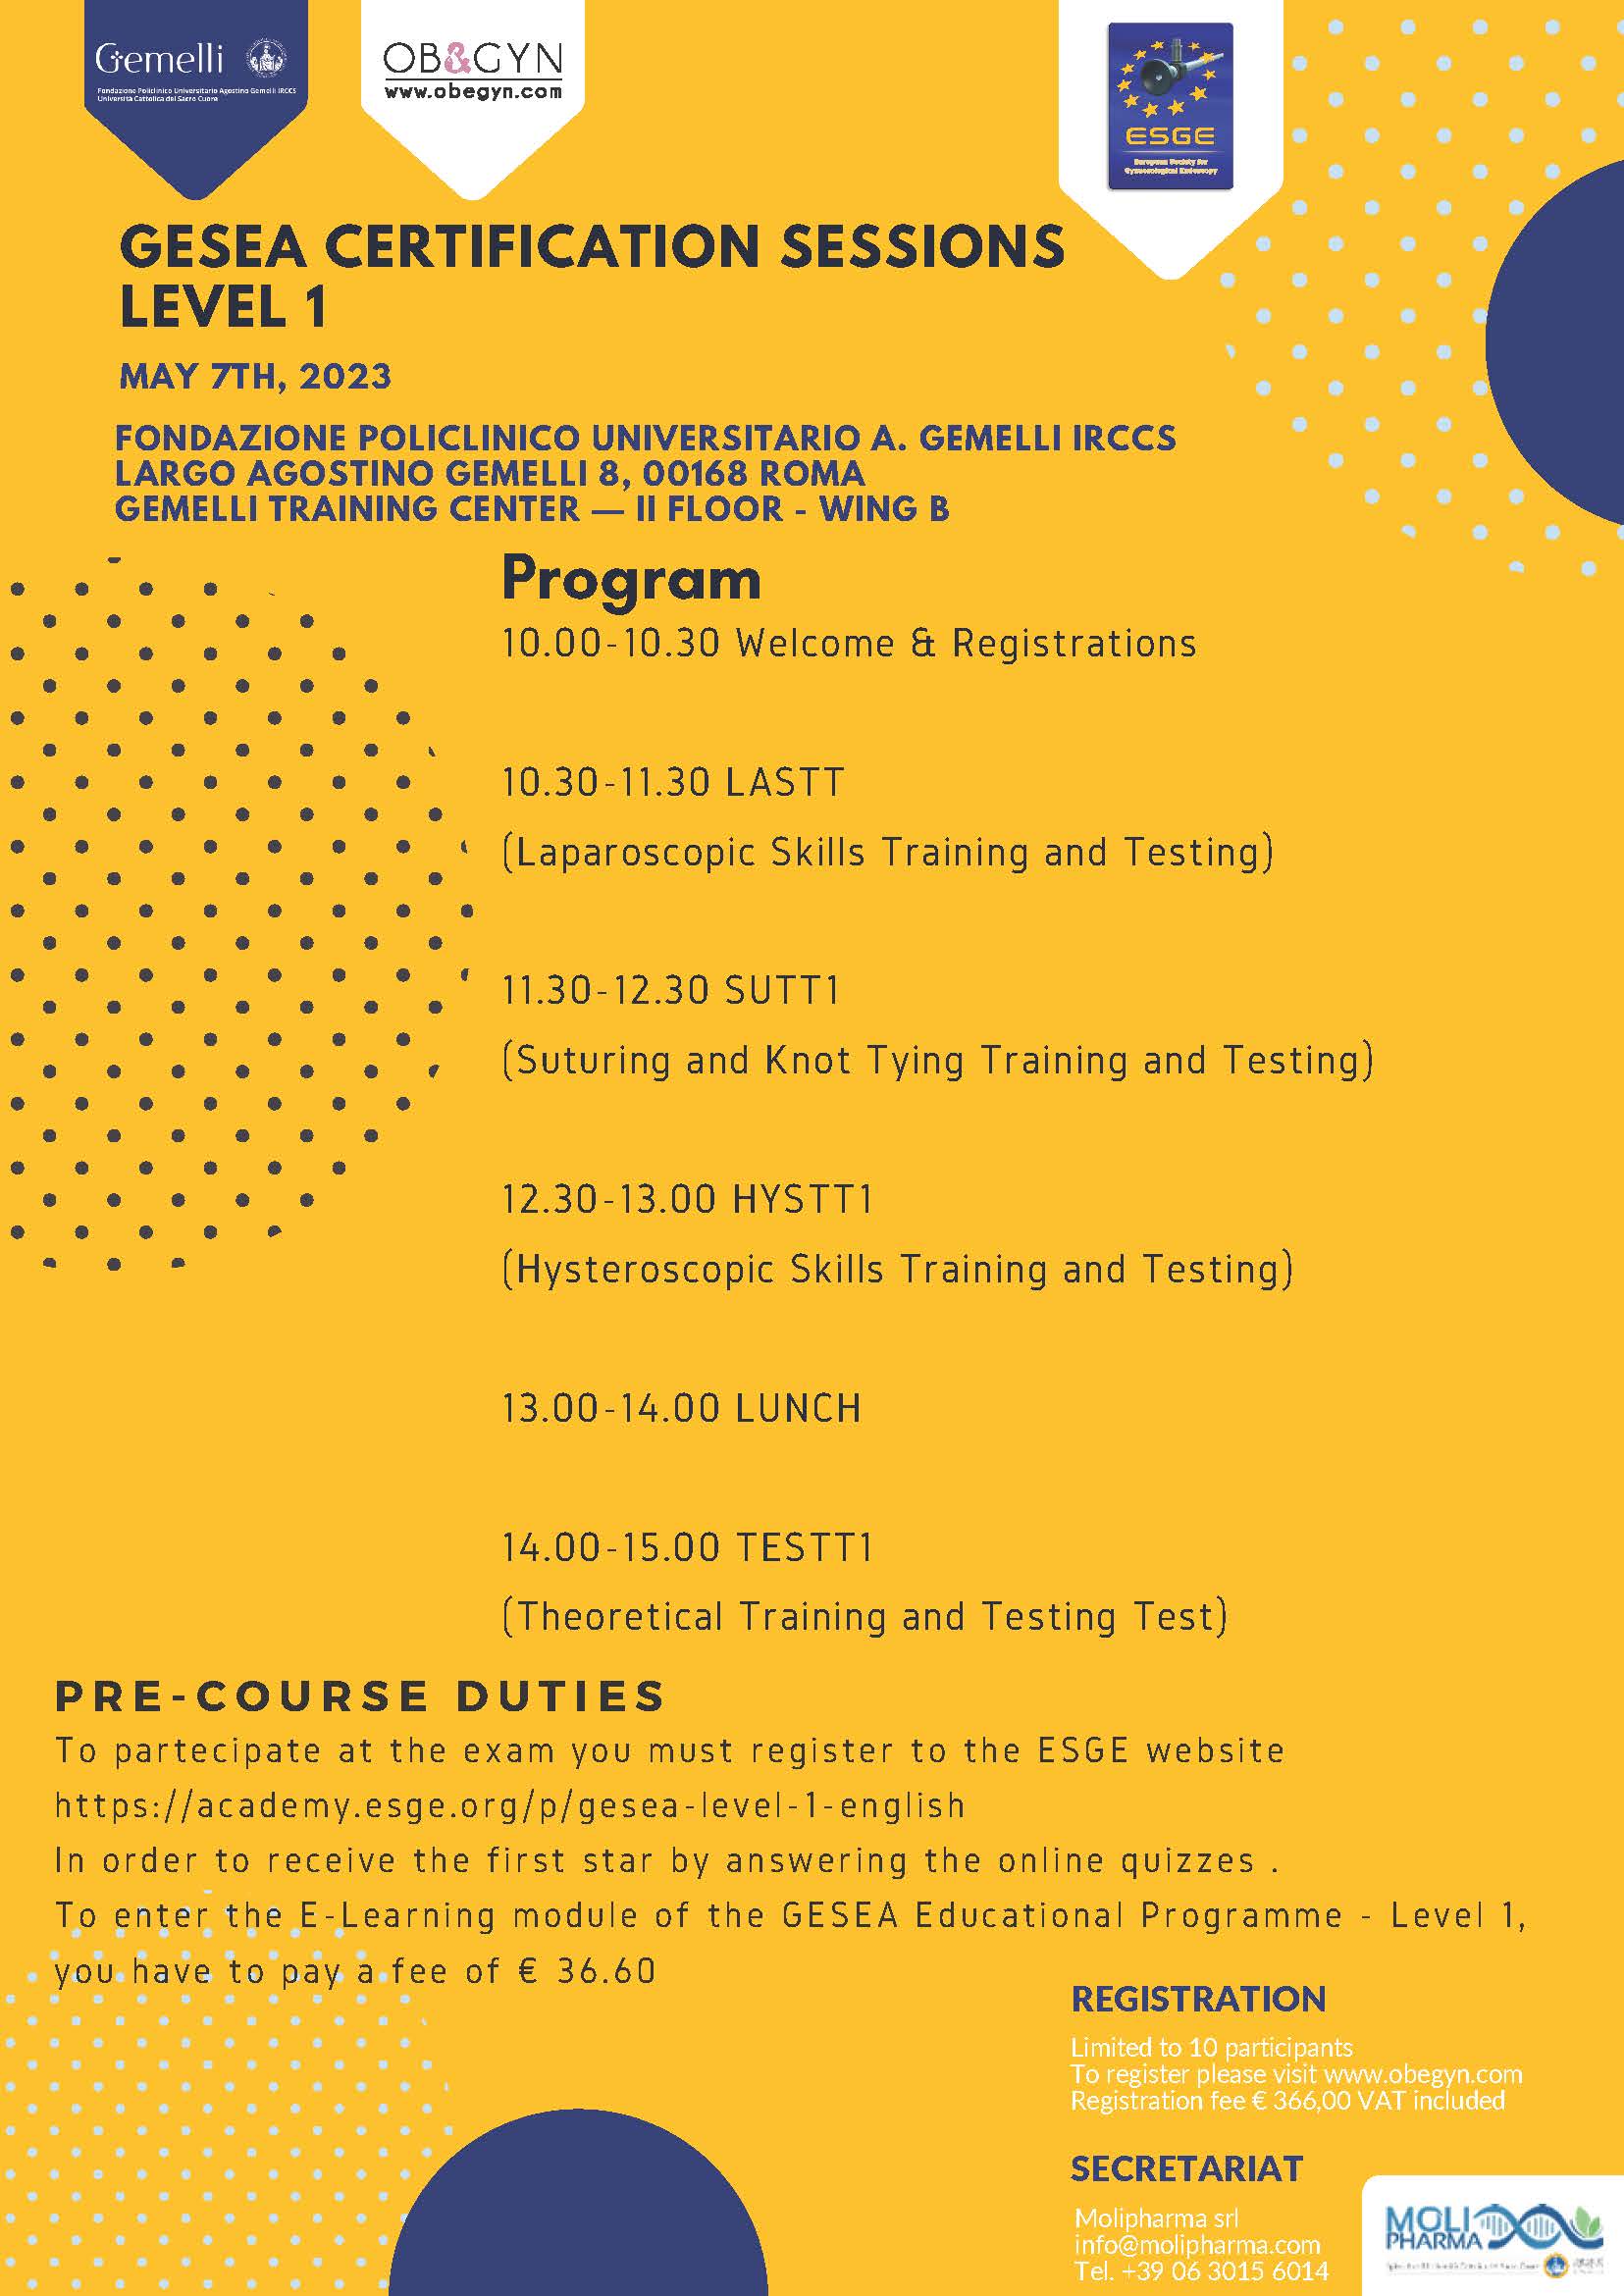 Programma GESEA CERTIFICATION SESSIONS — LEVEL 1 - MAY 7TH, 2023